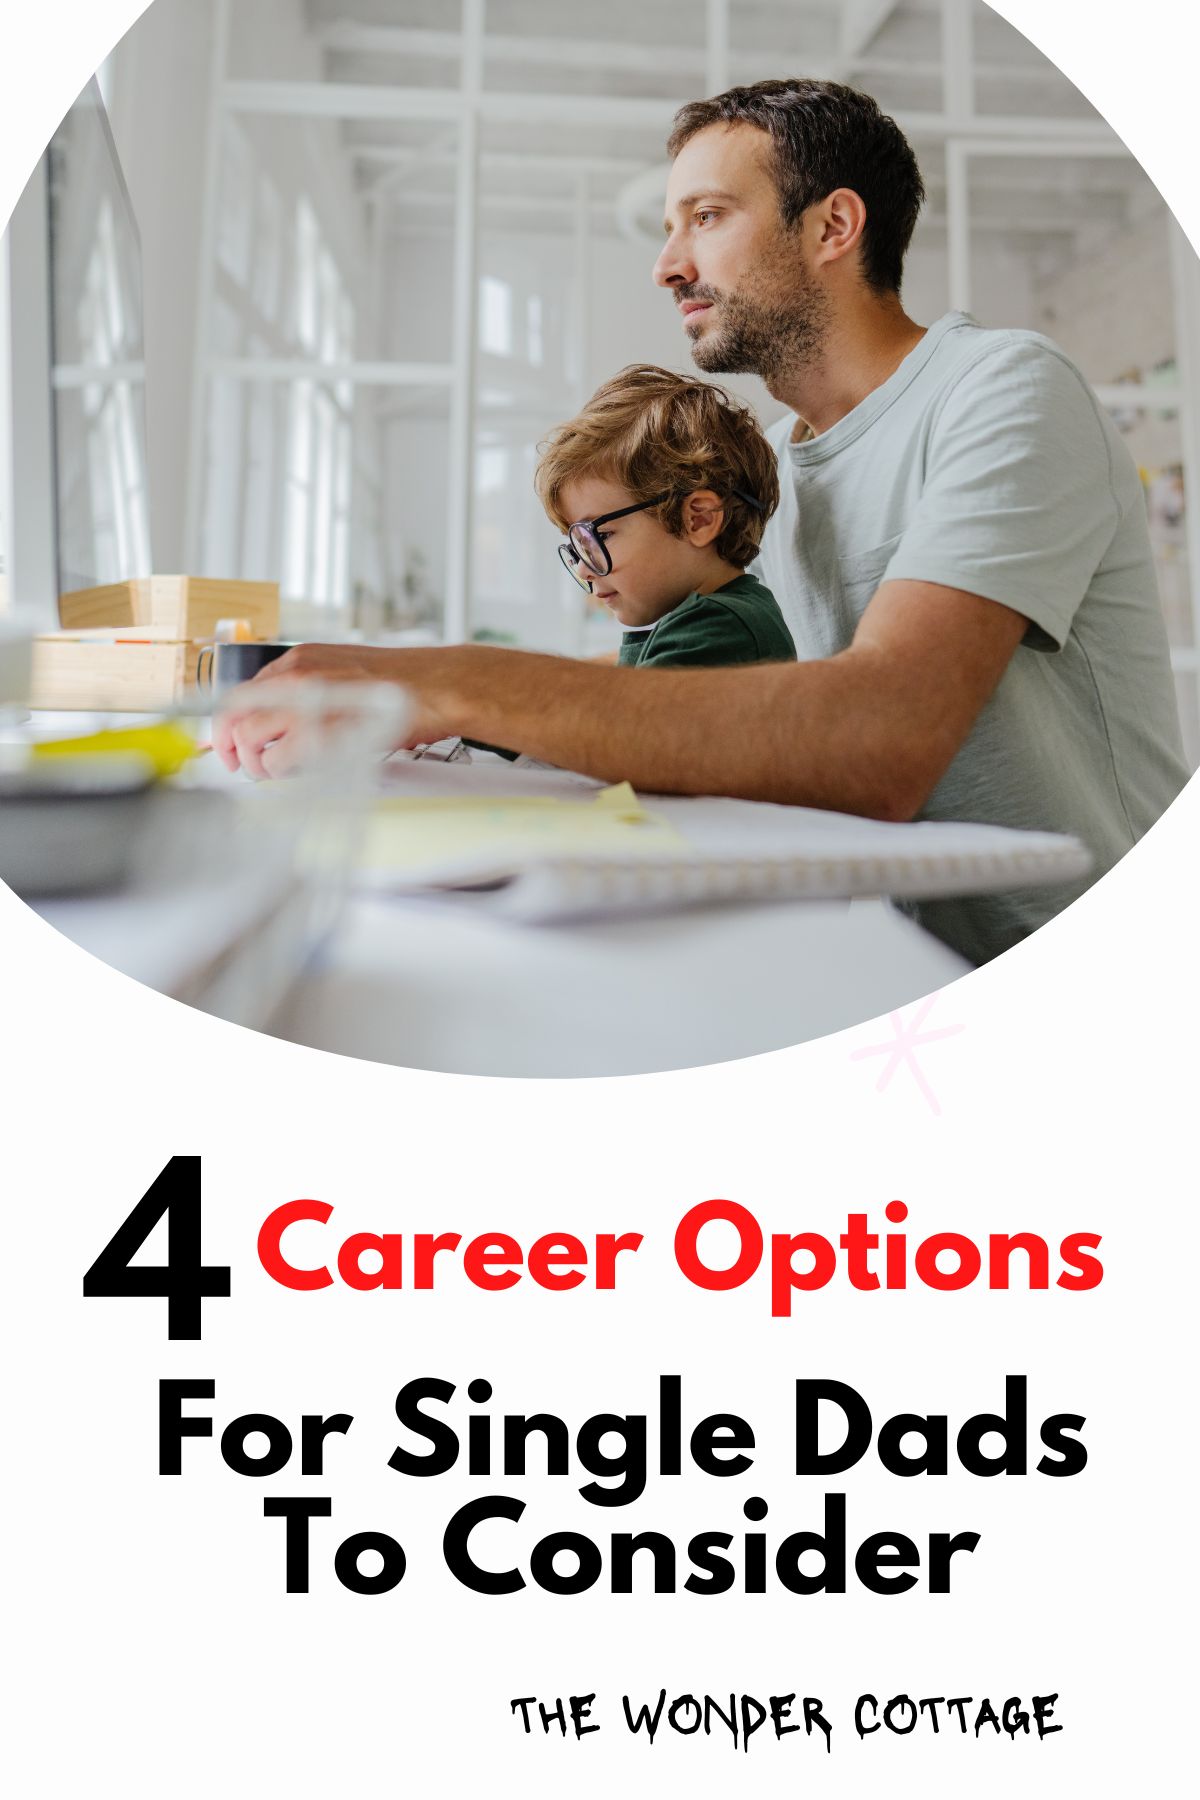 4 Career Options For Single Dads To Consider